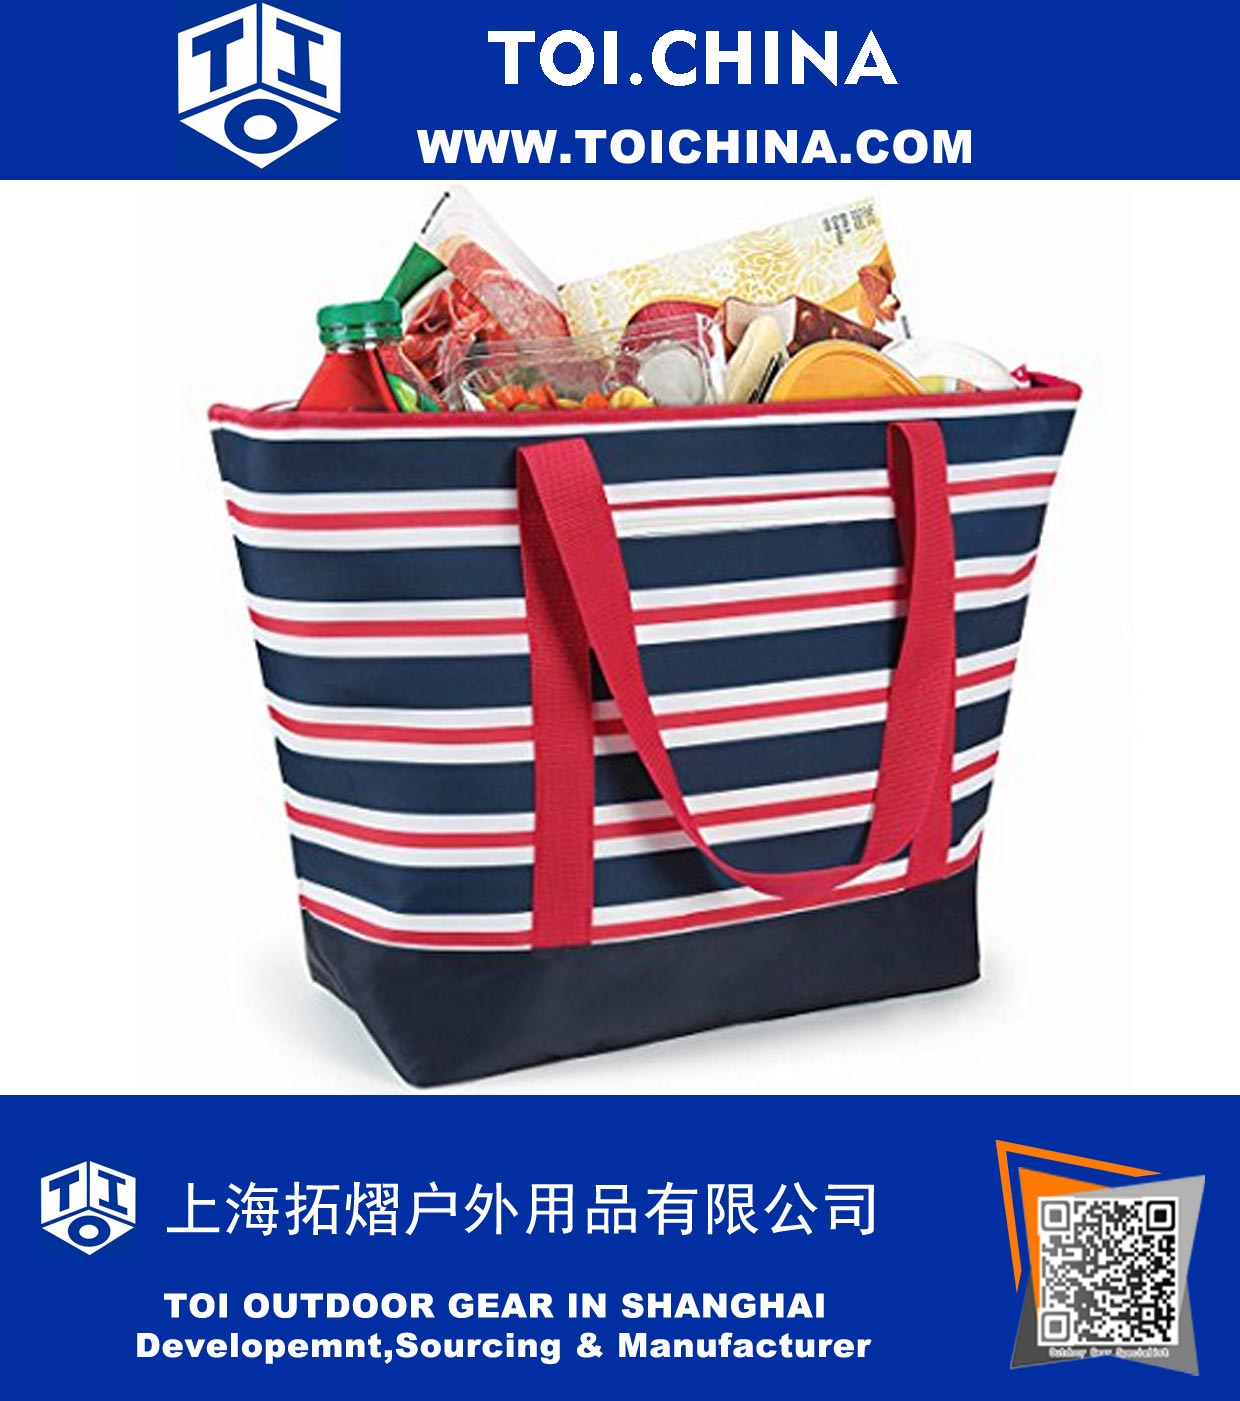 Insulated Mega Tote Red Bag - The Way to Transport Frozen Food, Perishables and Hot Food